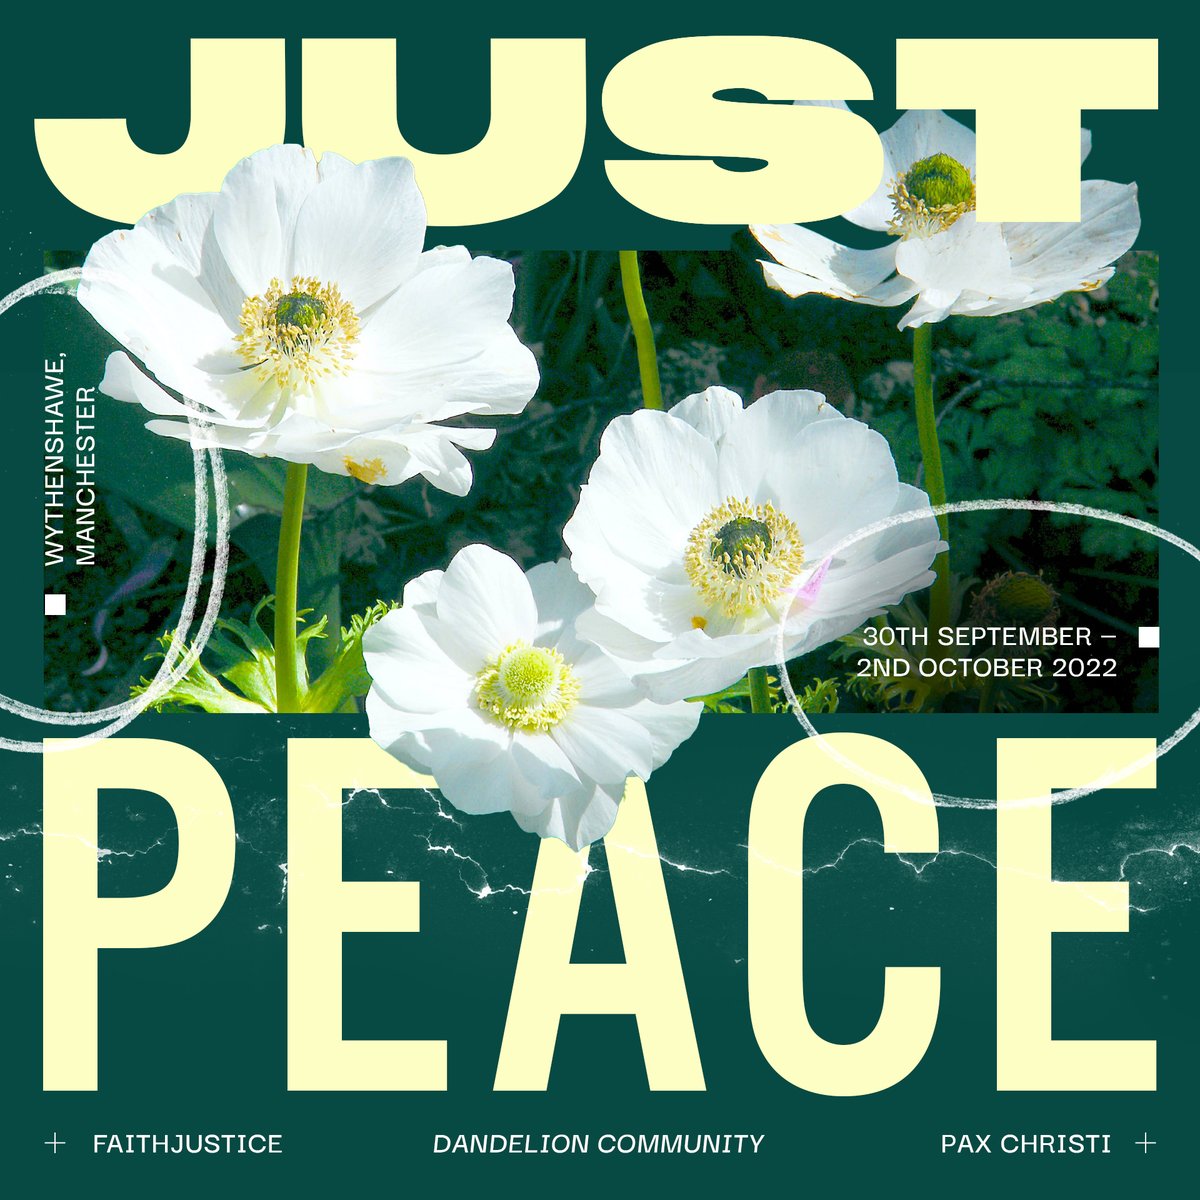 Sign up now for #JustPeace A weekend of working for peace, challenging the arms trade and militarism. faithjustice.org.uk/justpeace 30 Sept - 2 Oct